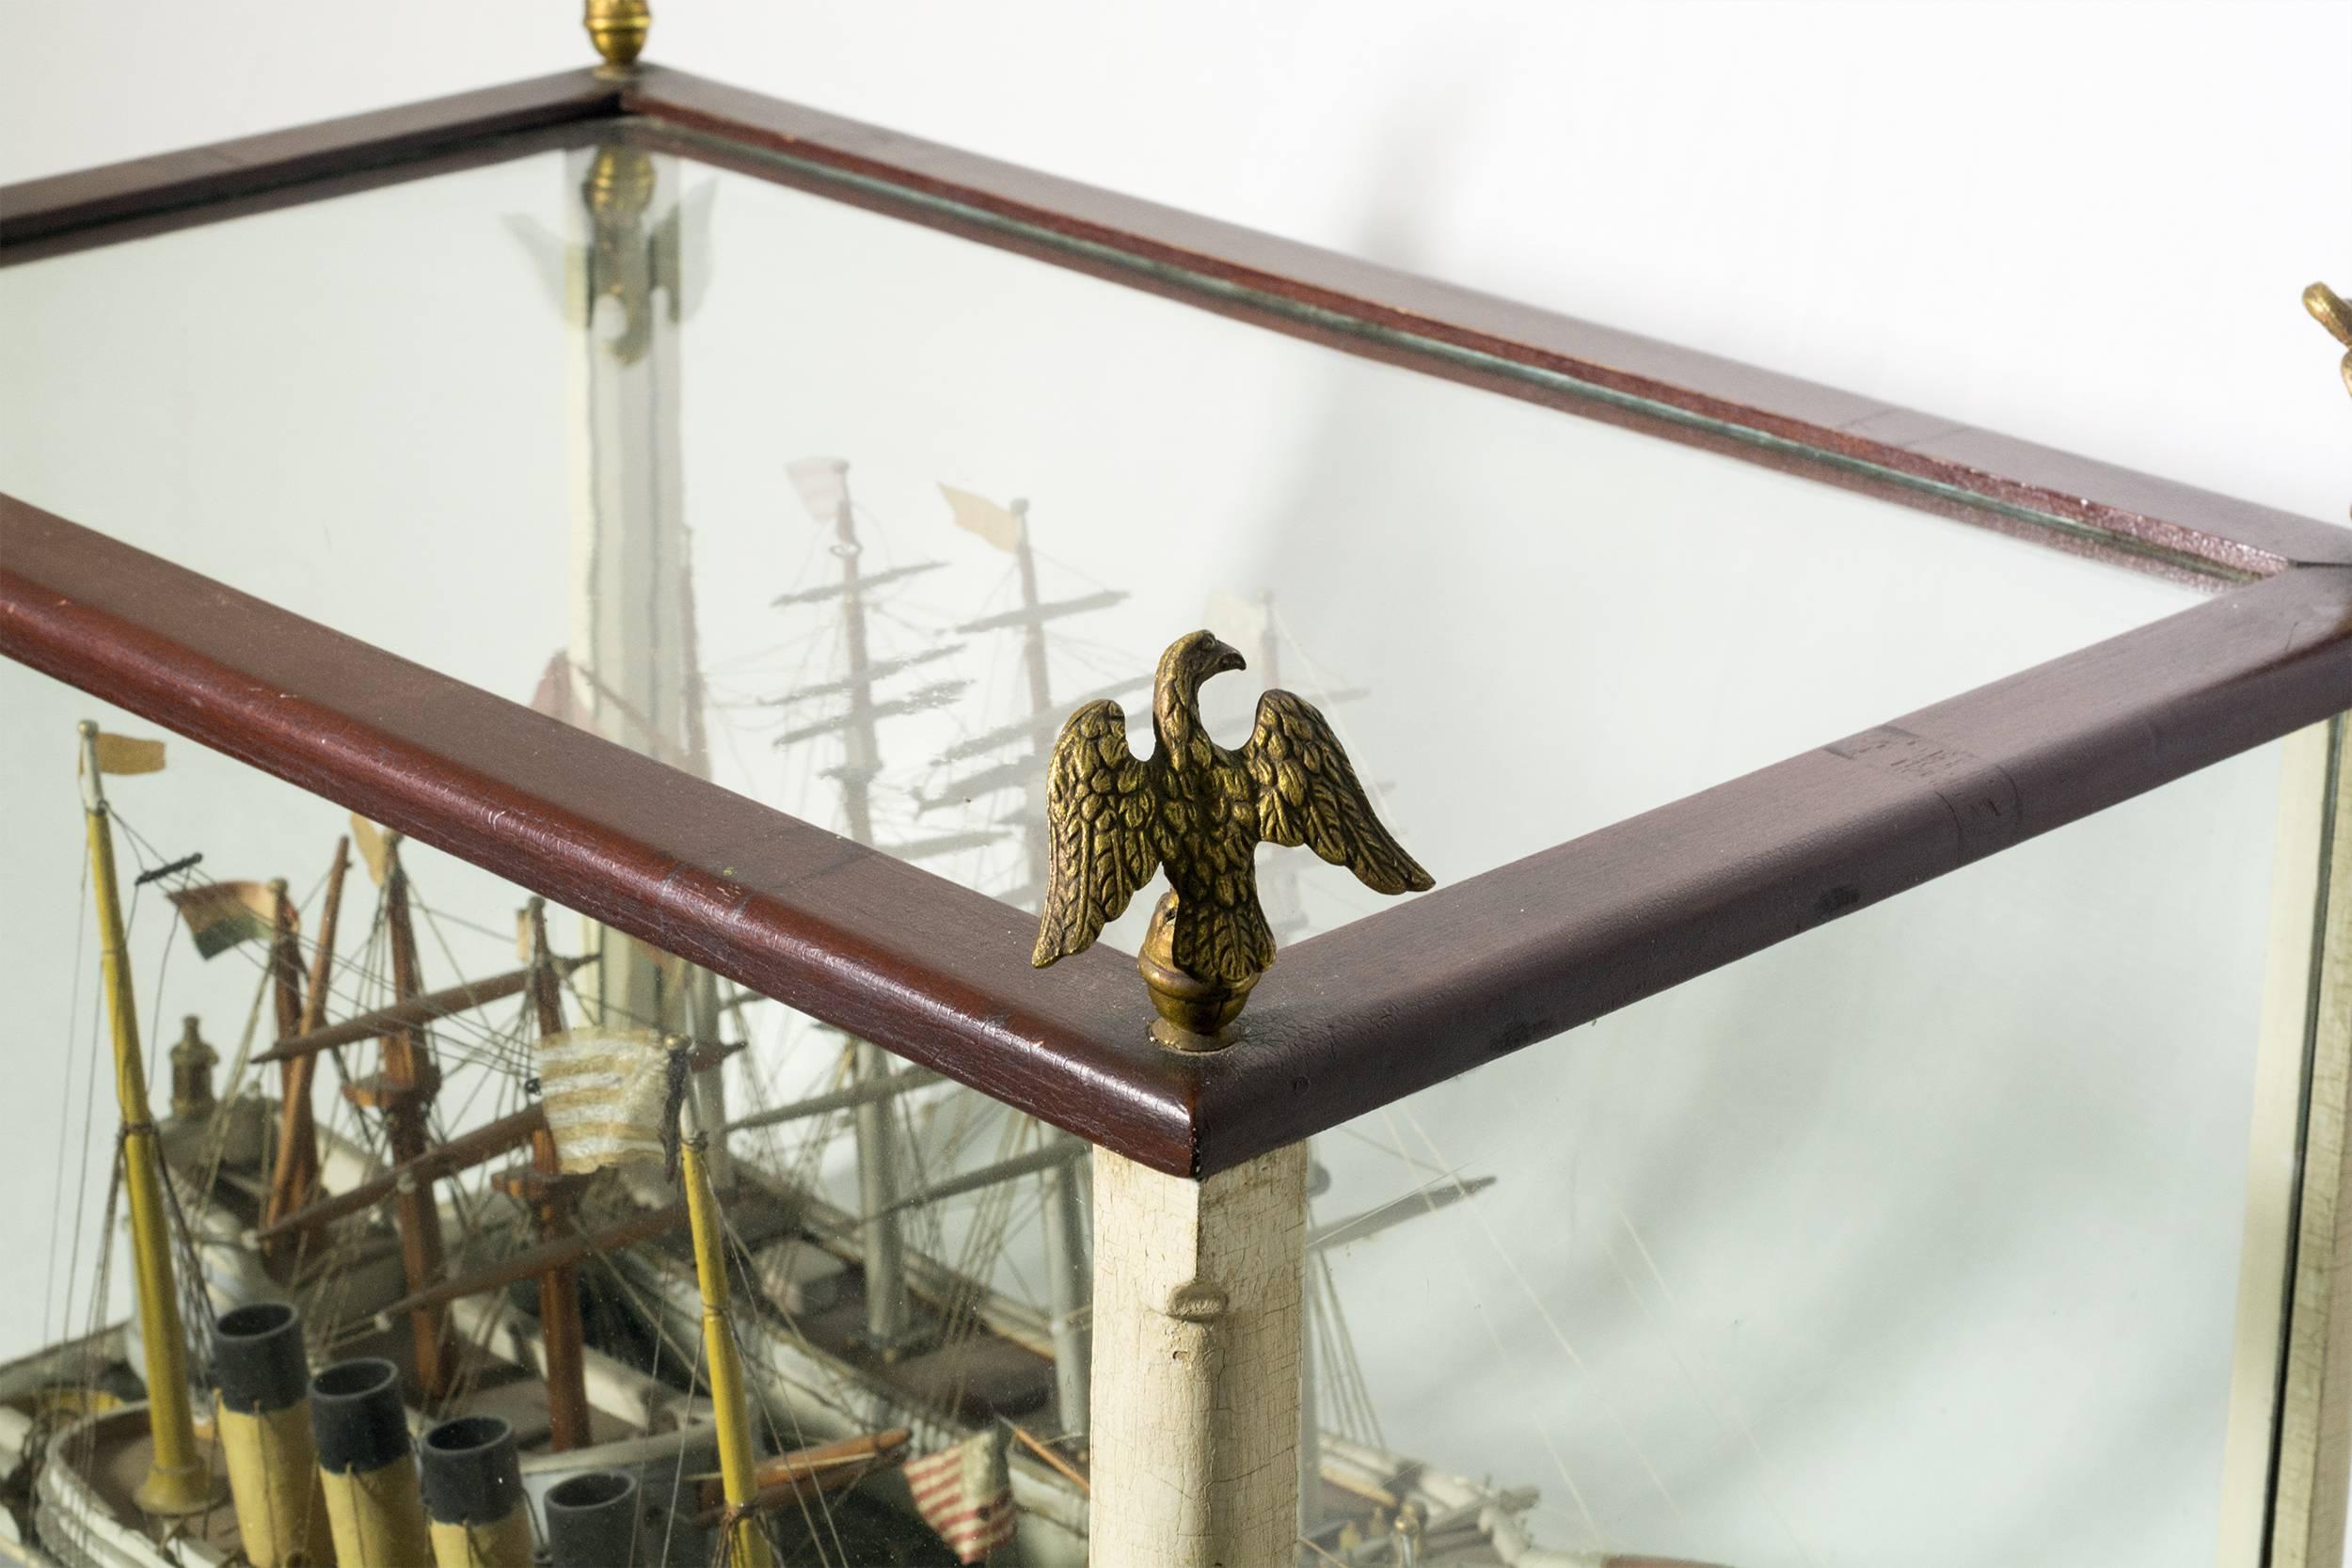 The diorama has four different ship types, with both American and England vessels, mounted on a molded putty sea. The case is painted and has four brass eagle finials.